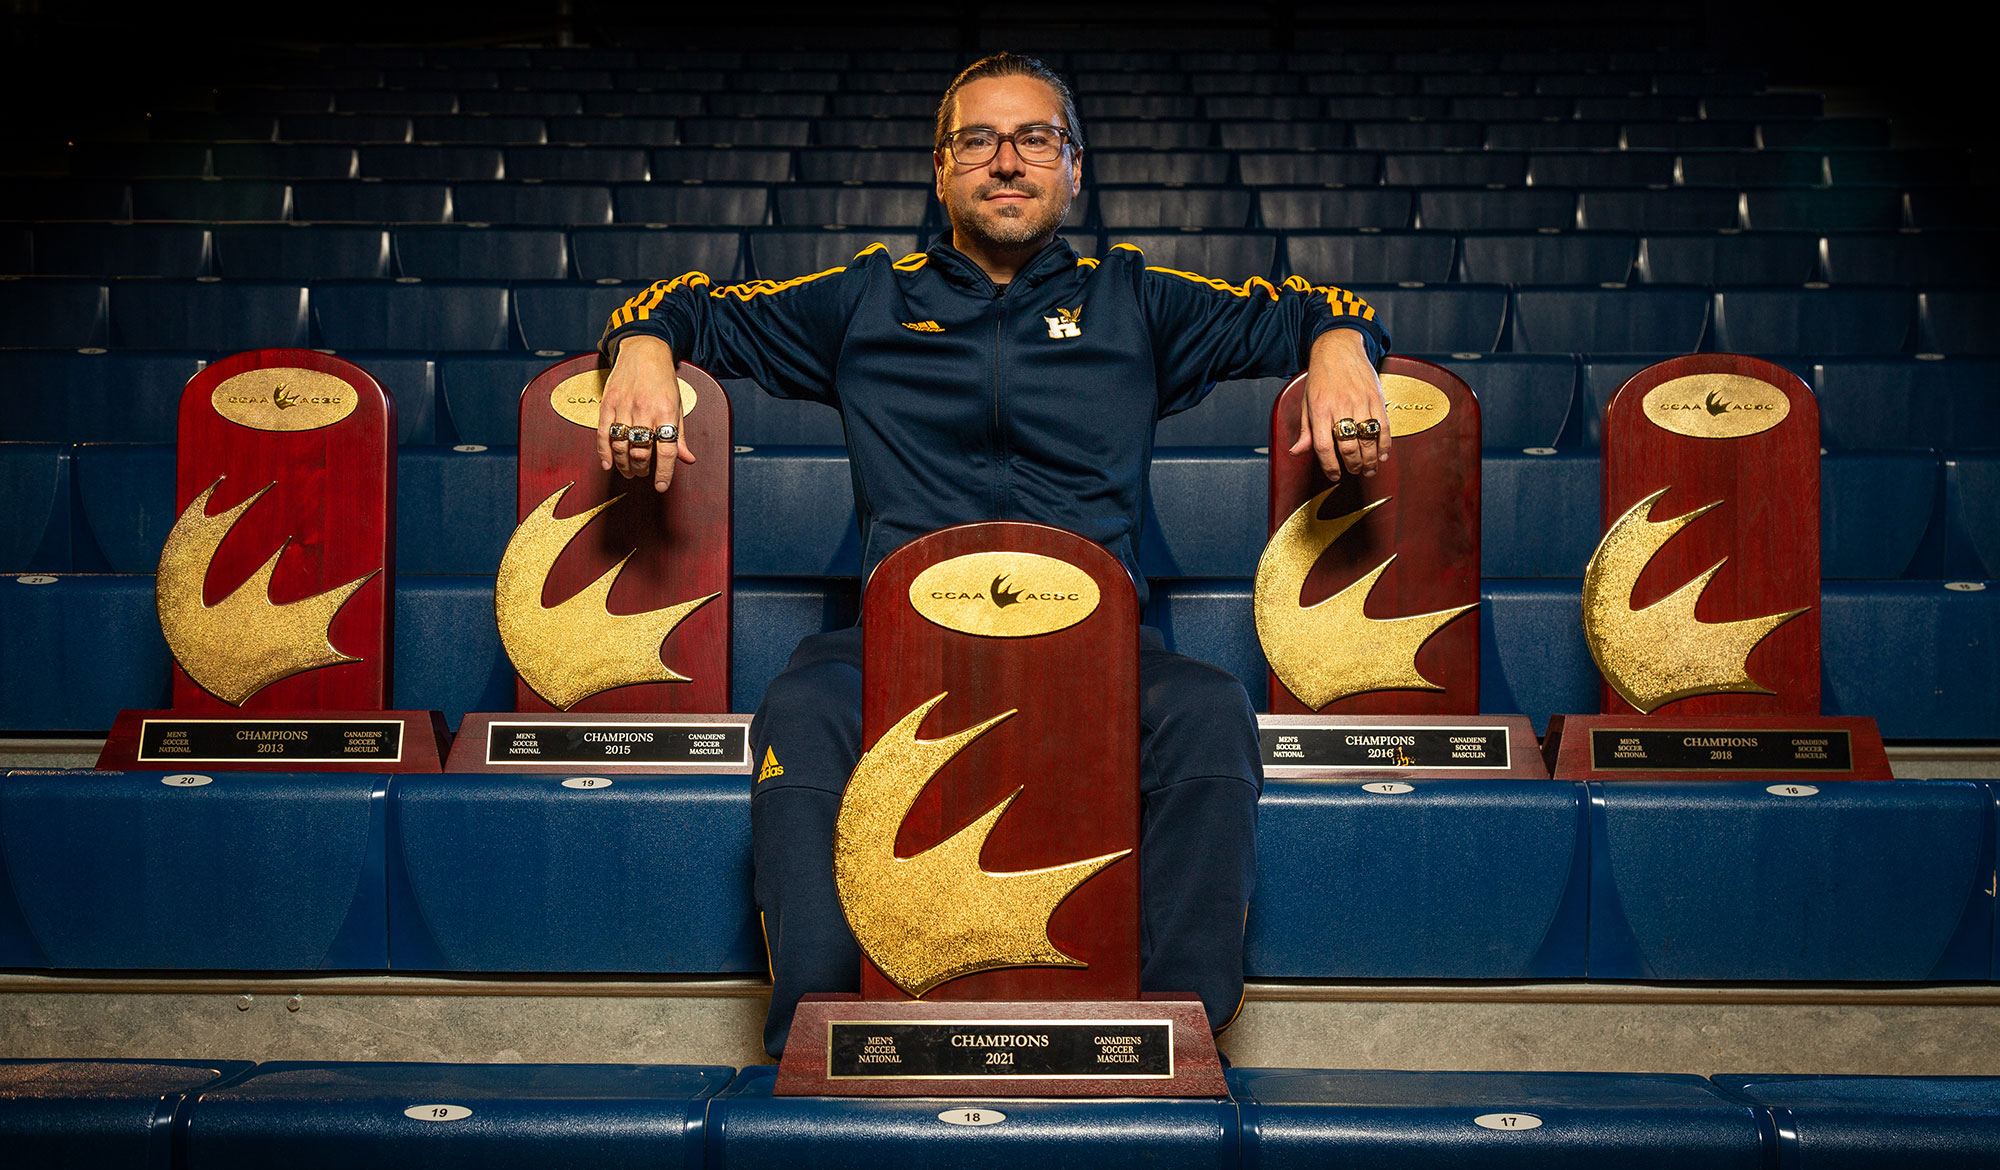 Coach Aquino posing with his five national championship trophies